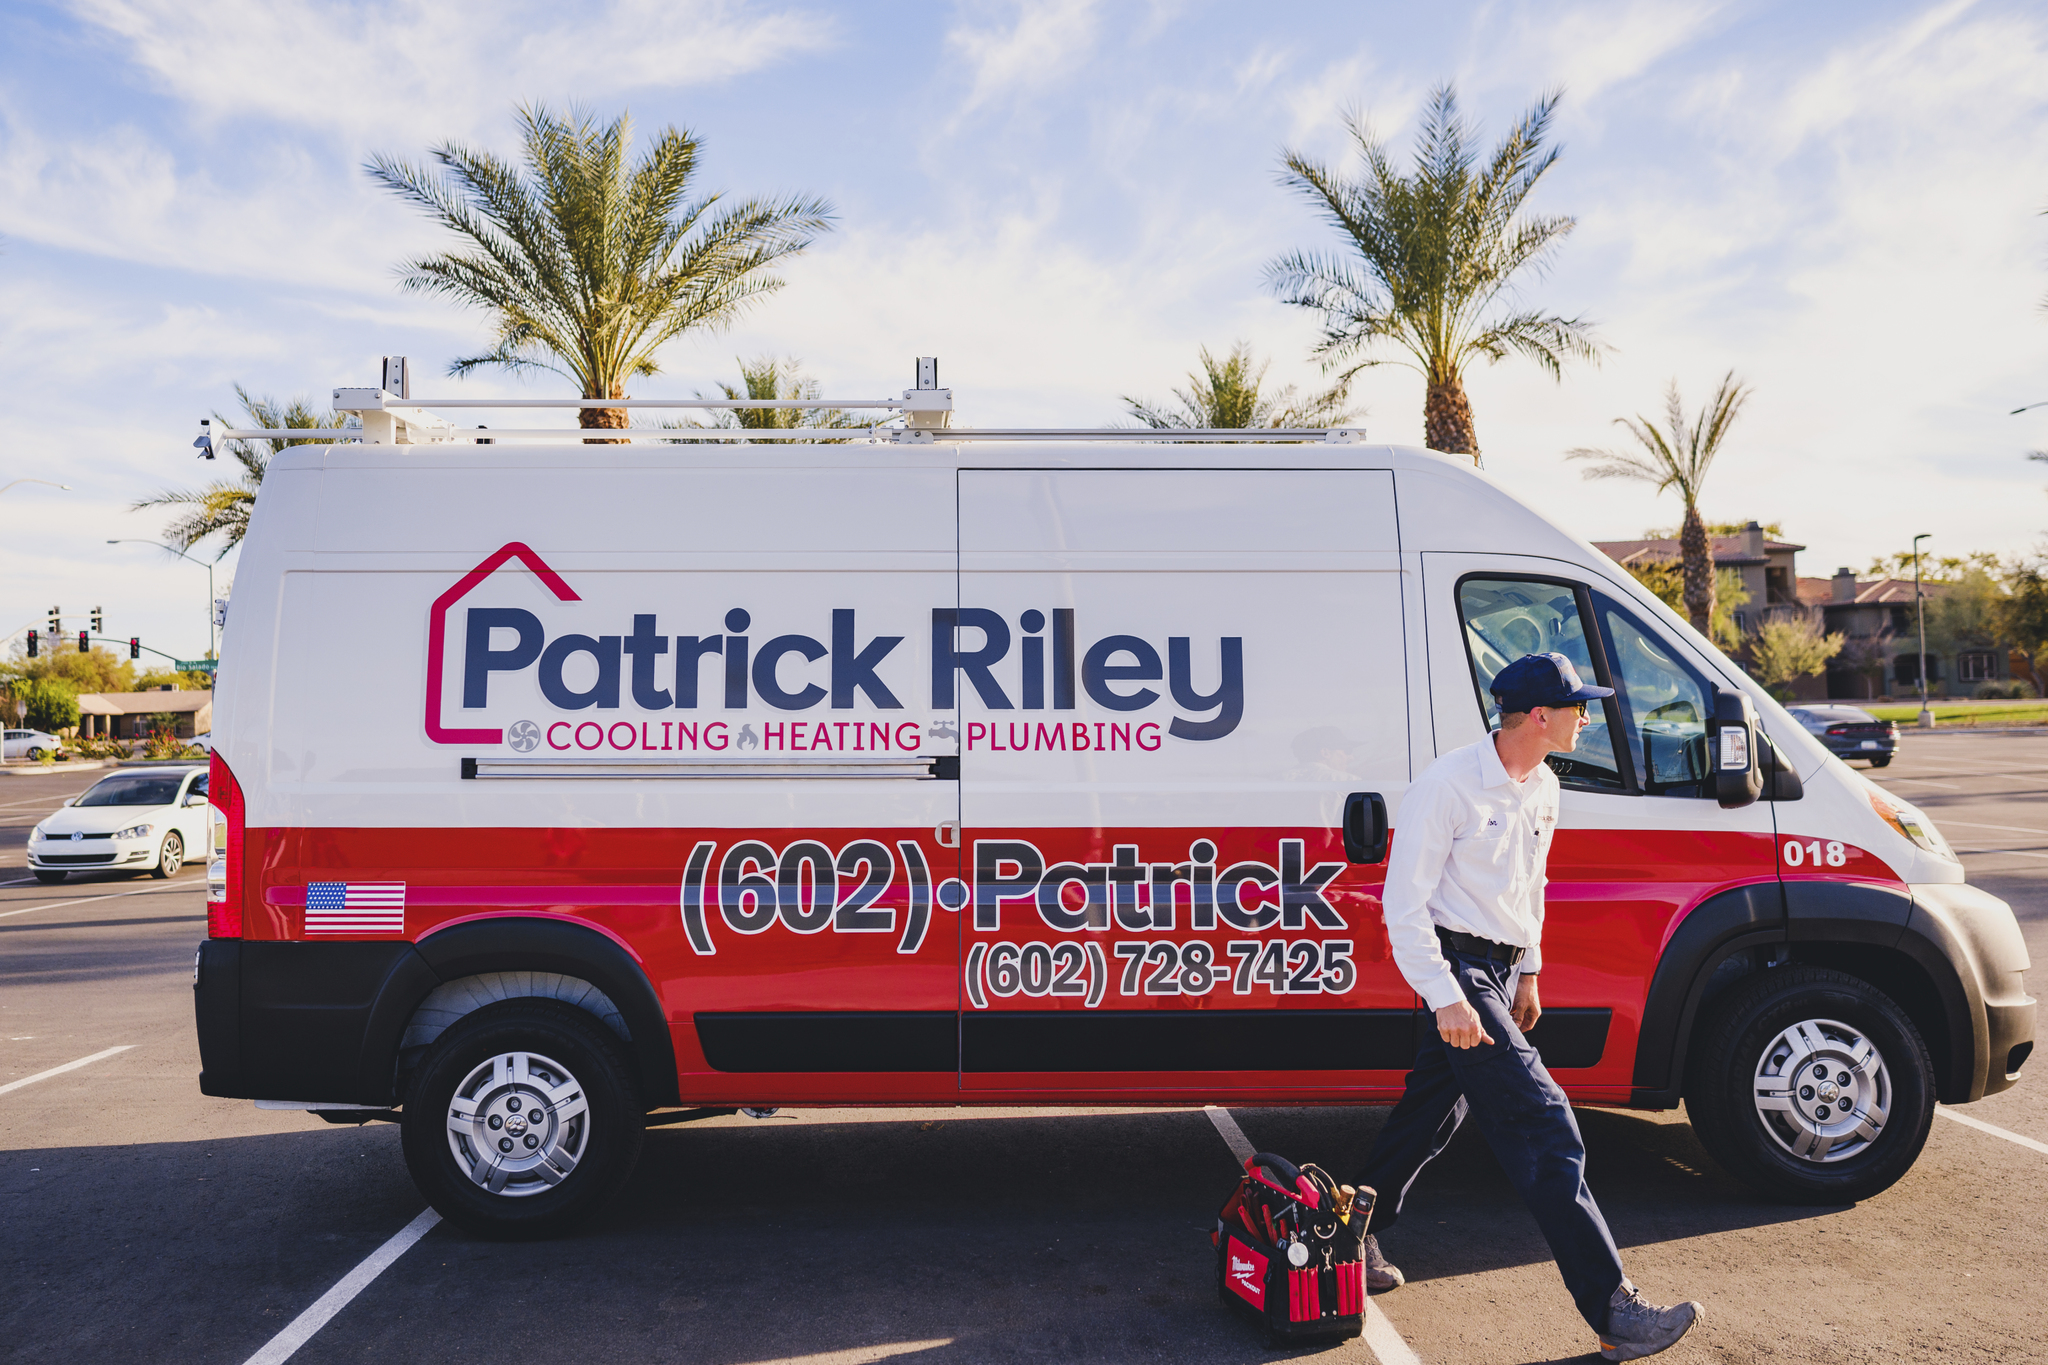 Book with Patrick Riley